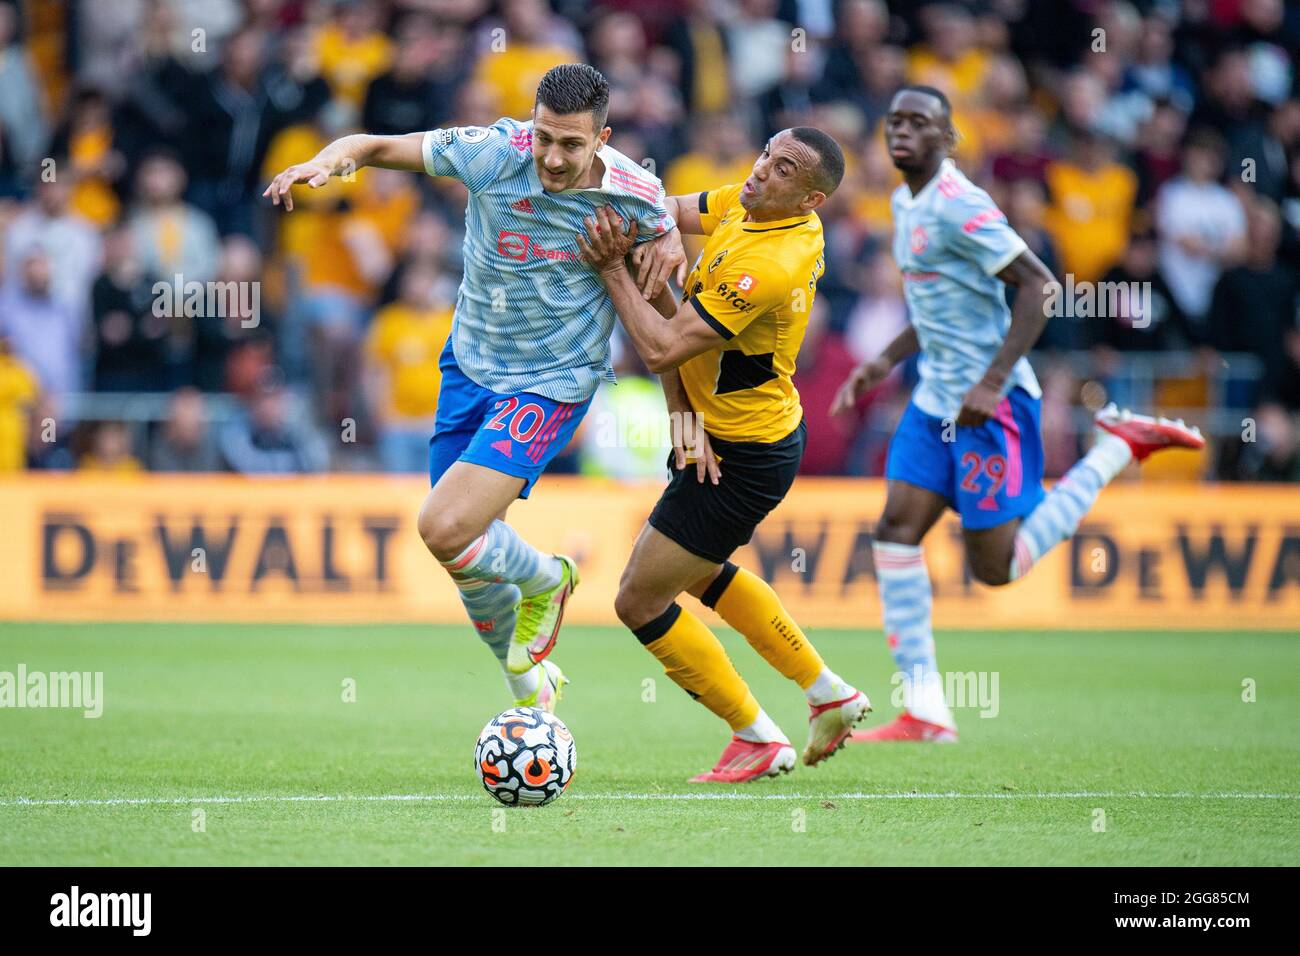 WOLVERHAMPTON, ENGLAND - AUGUST 29: Diogo Dolot of Manchester United and Marcal of Wolverhampton Wanderers in action during the Premier League match b Stock Photo